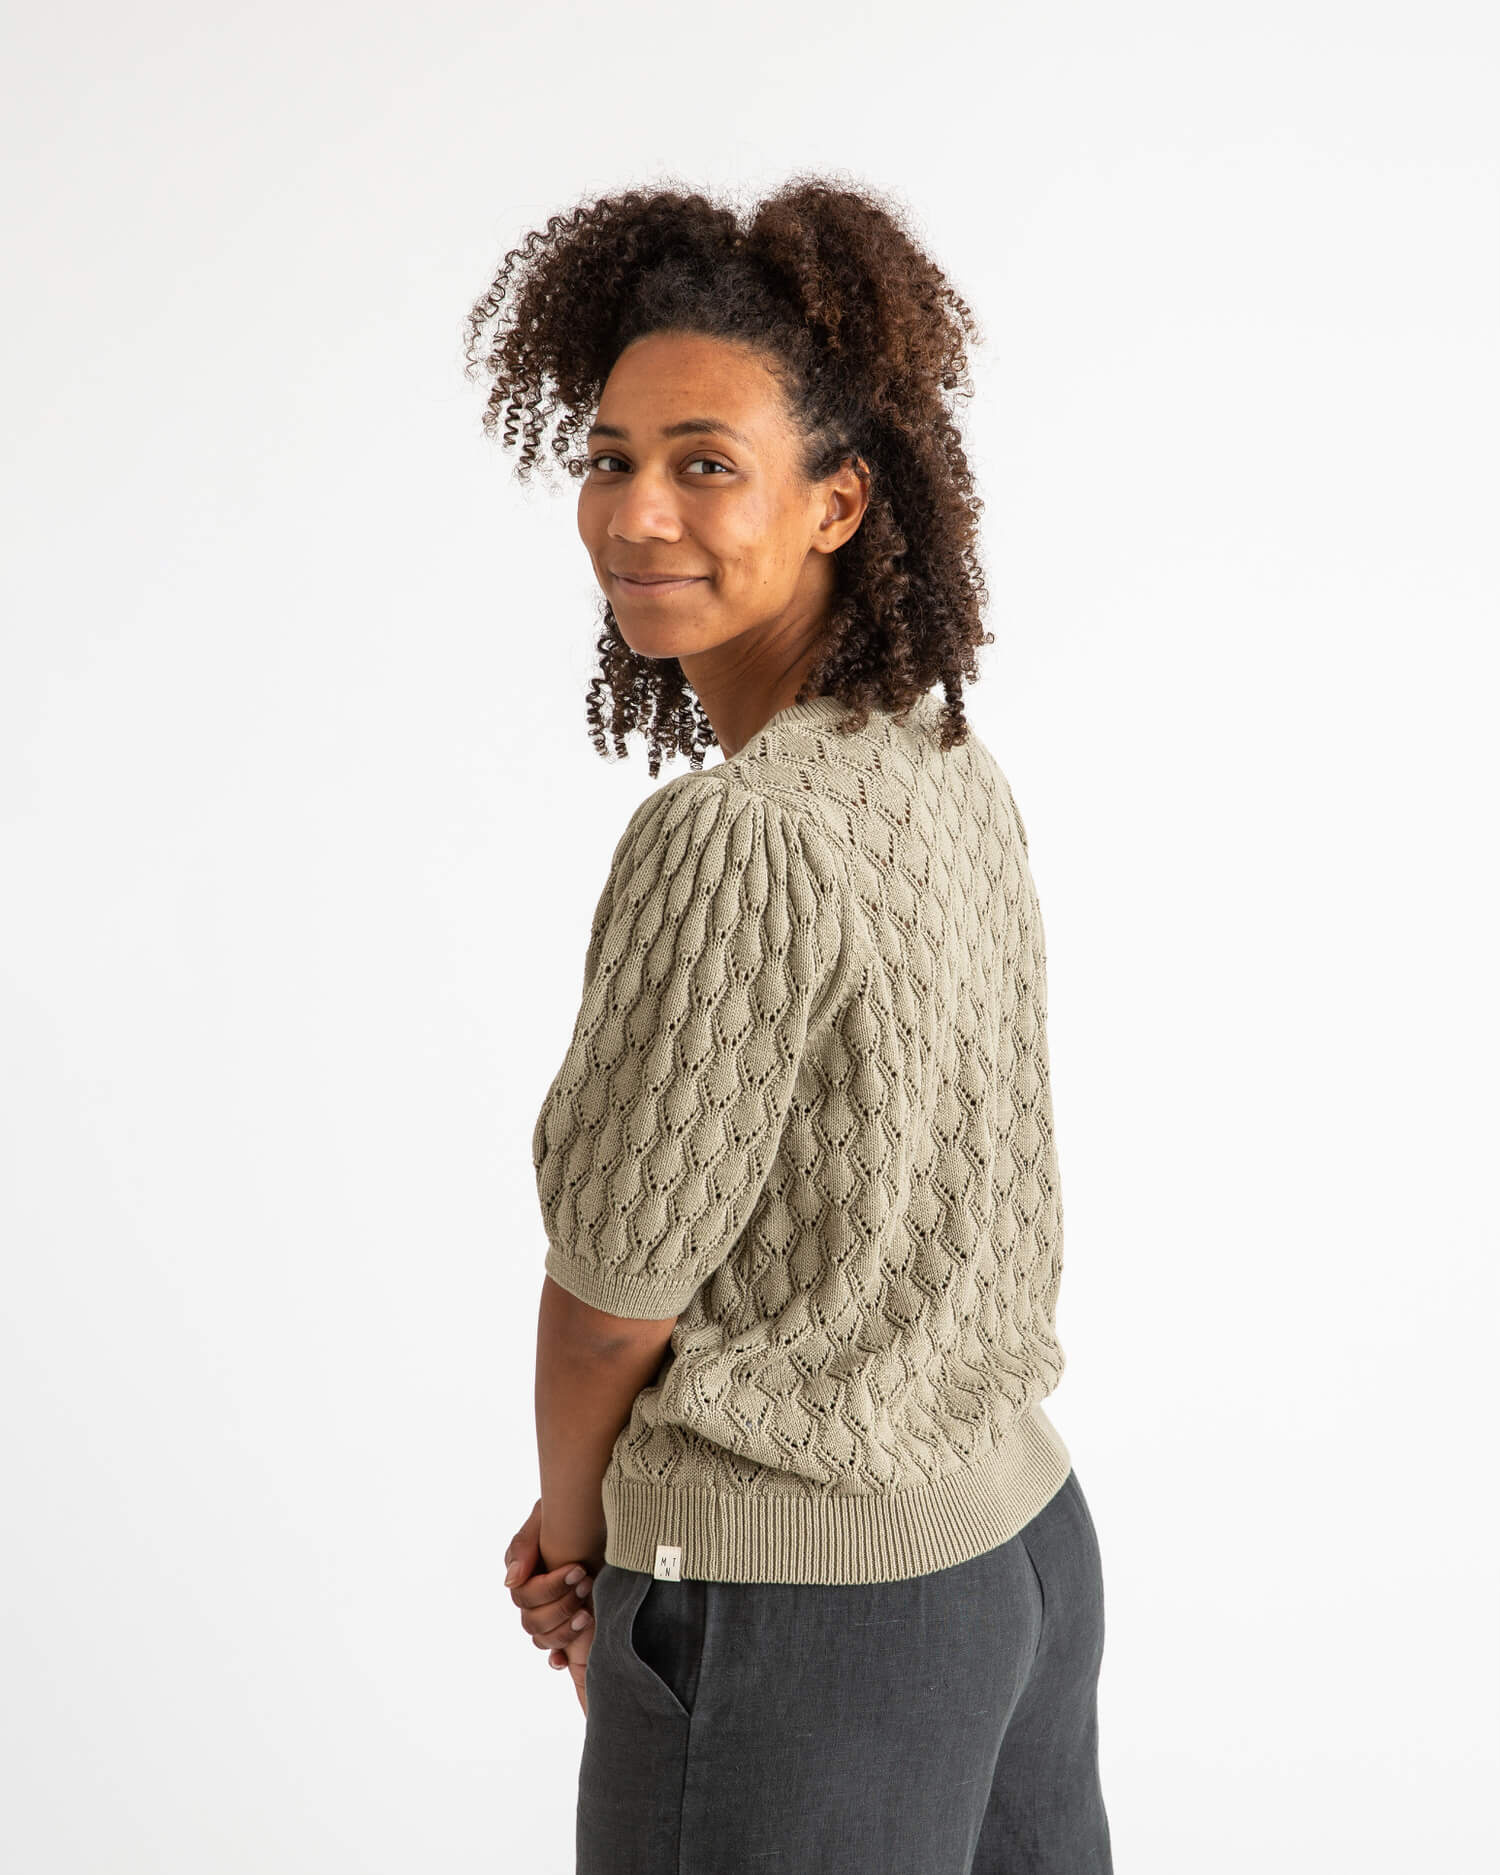 Green, knitted blouse made from 100% organic cotton by Matona